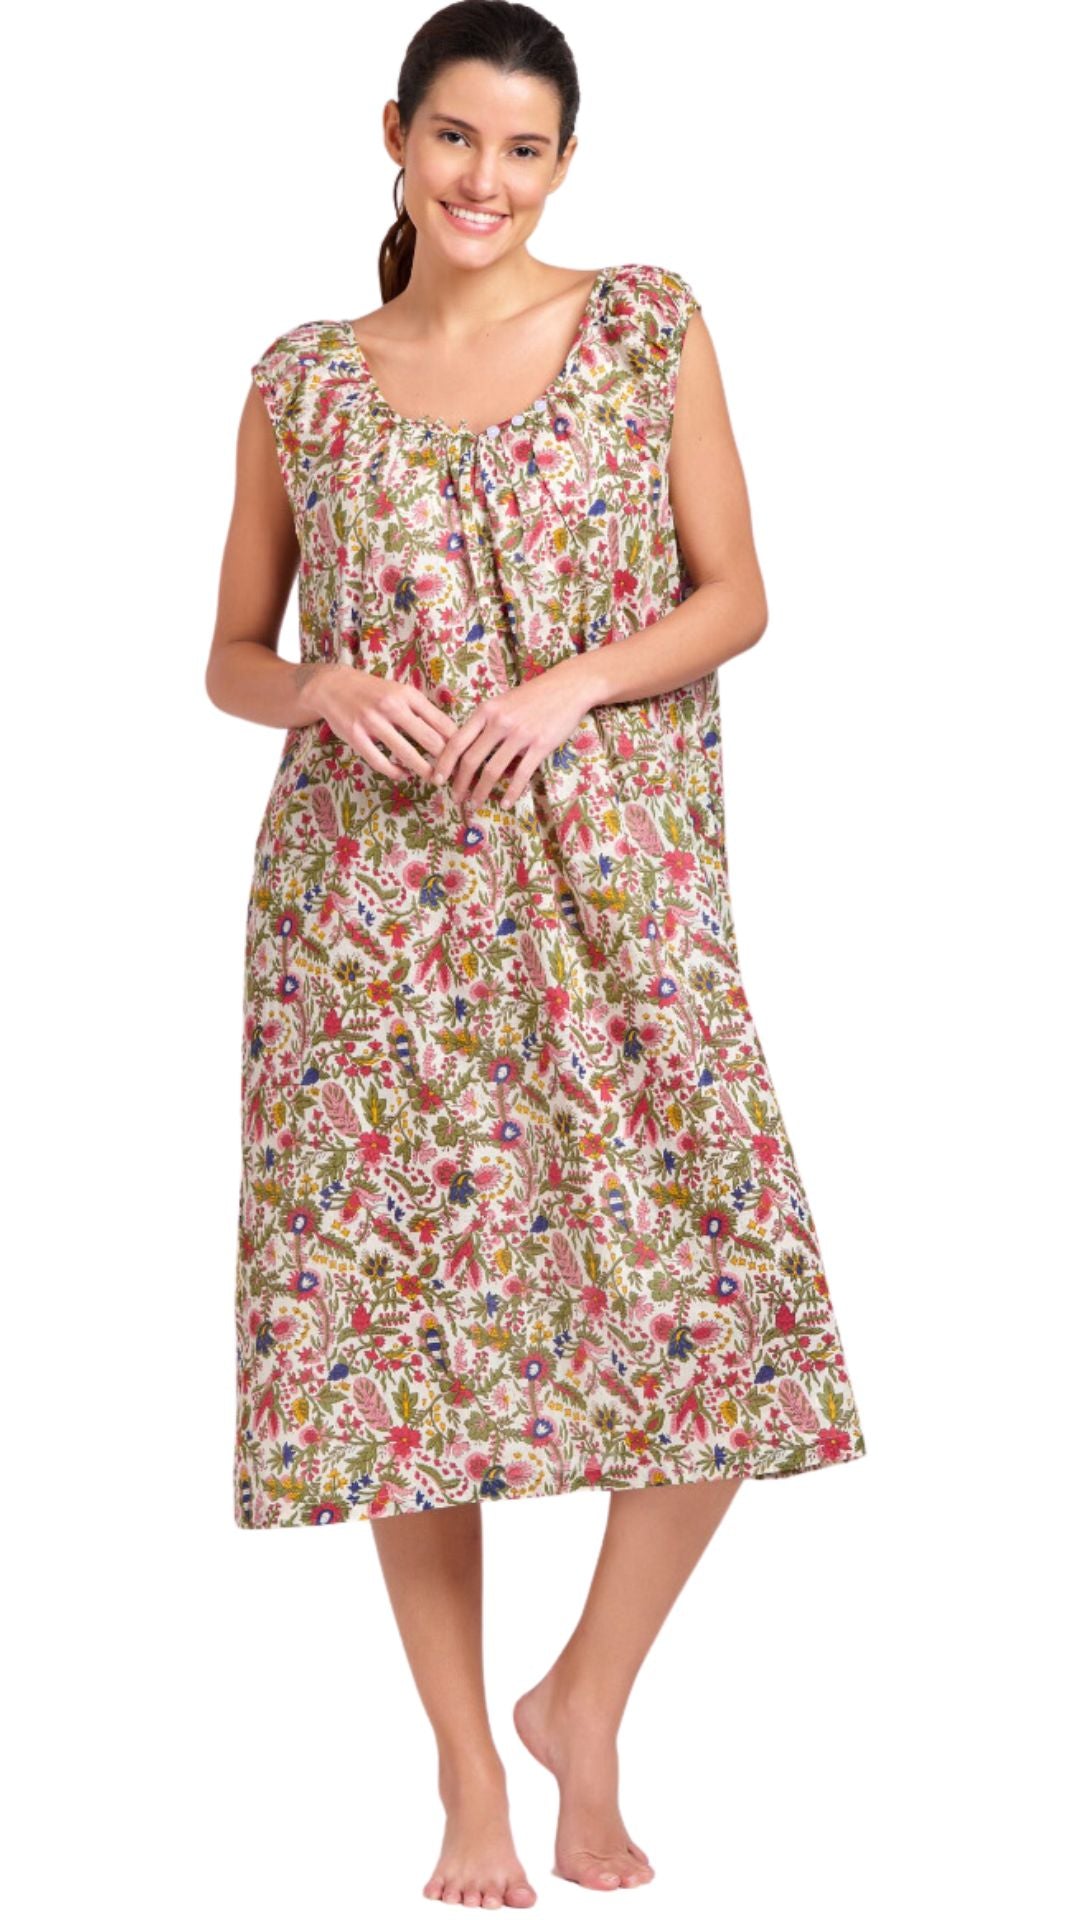 Floral cotton nightgown in modern style on model